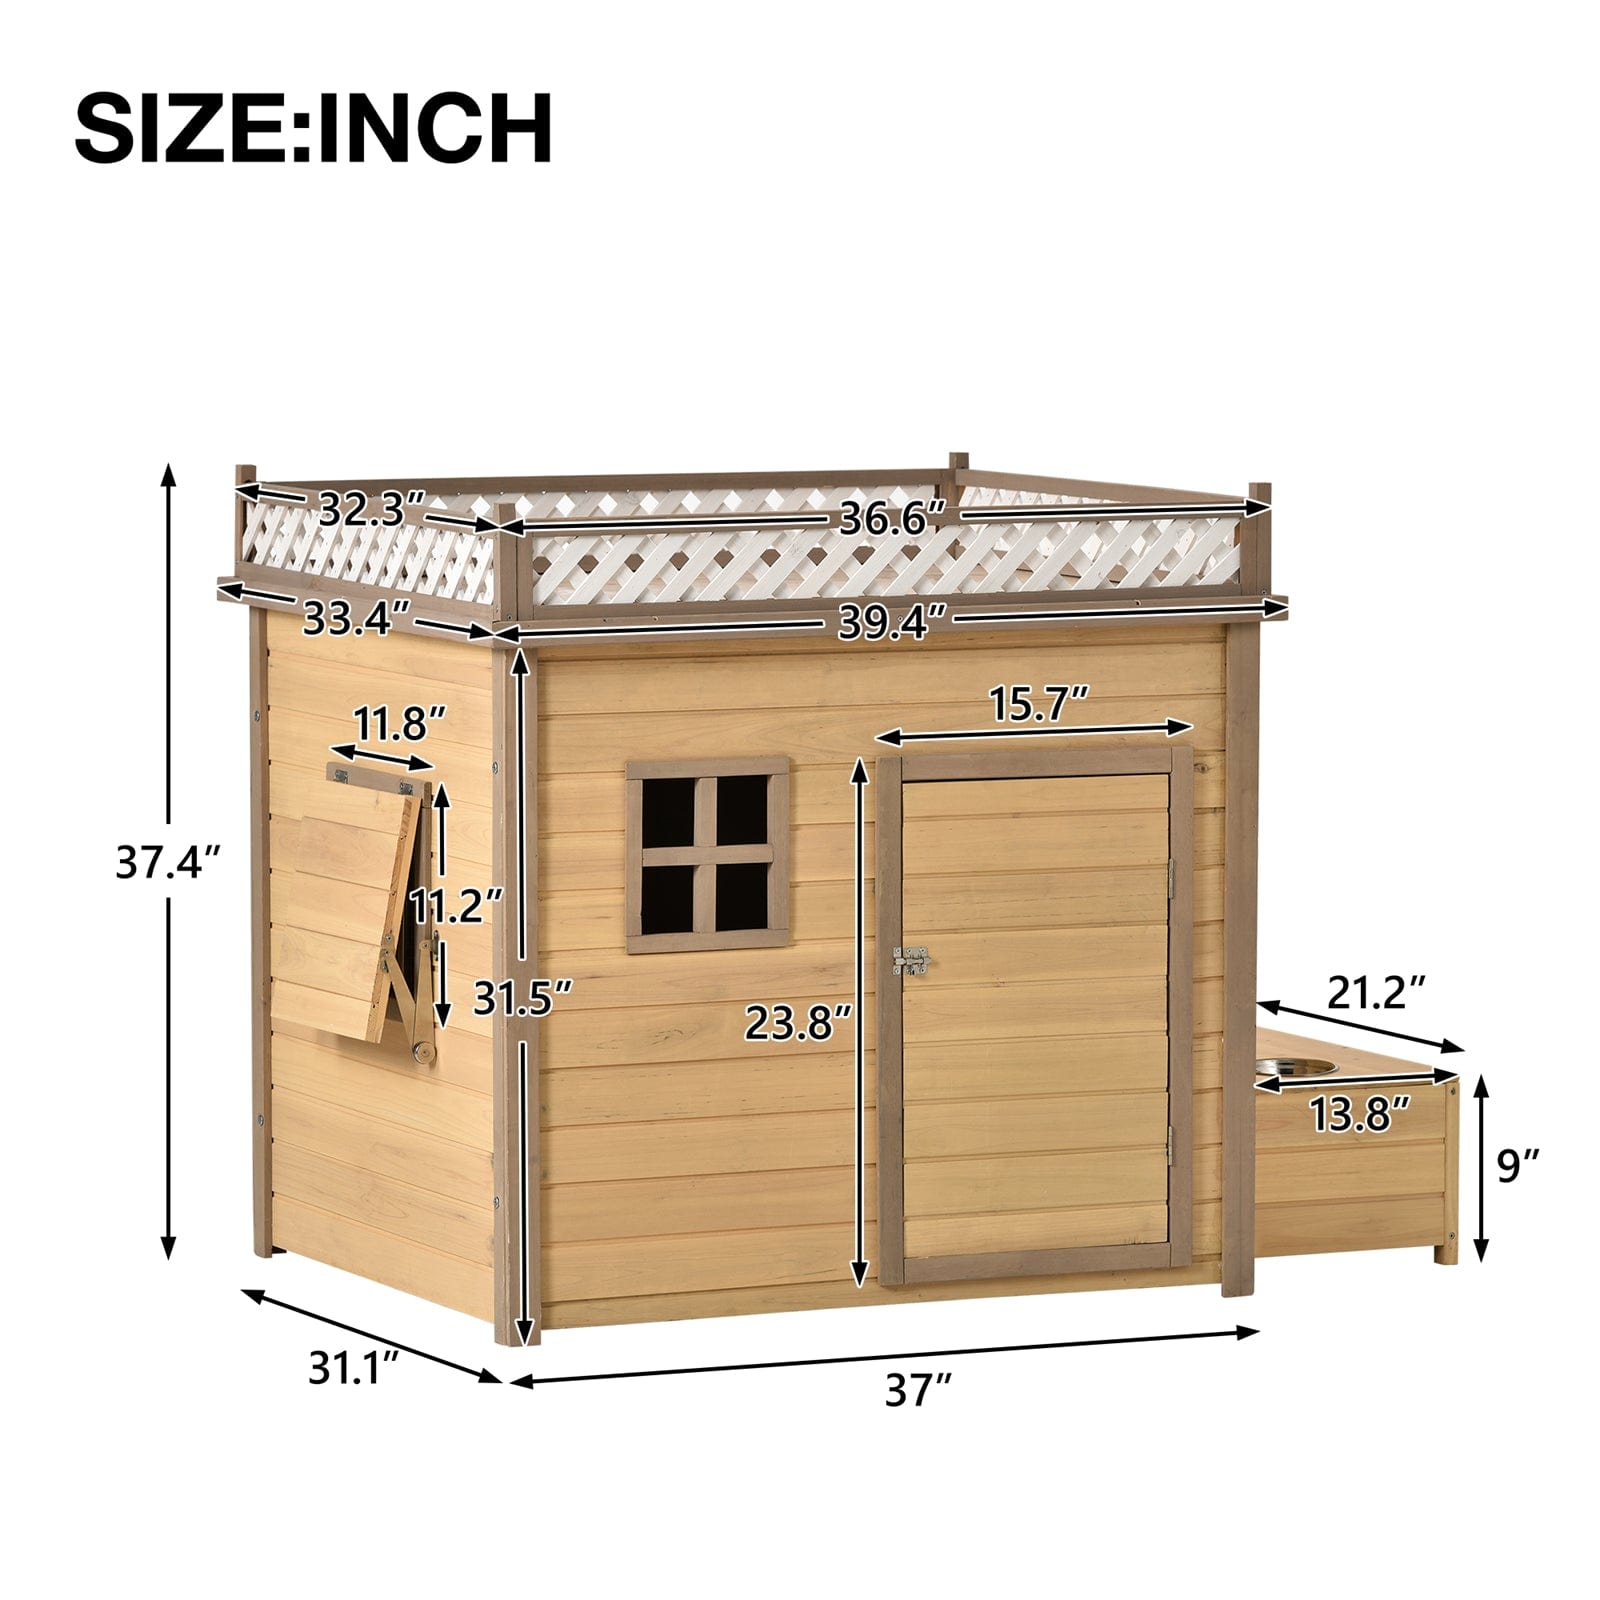 Wooden Dog Houses Weatherproof, 39.4” Puppy Shelter Kennel with Flower Stand, Plant Stand, Wood Feeder